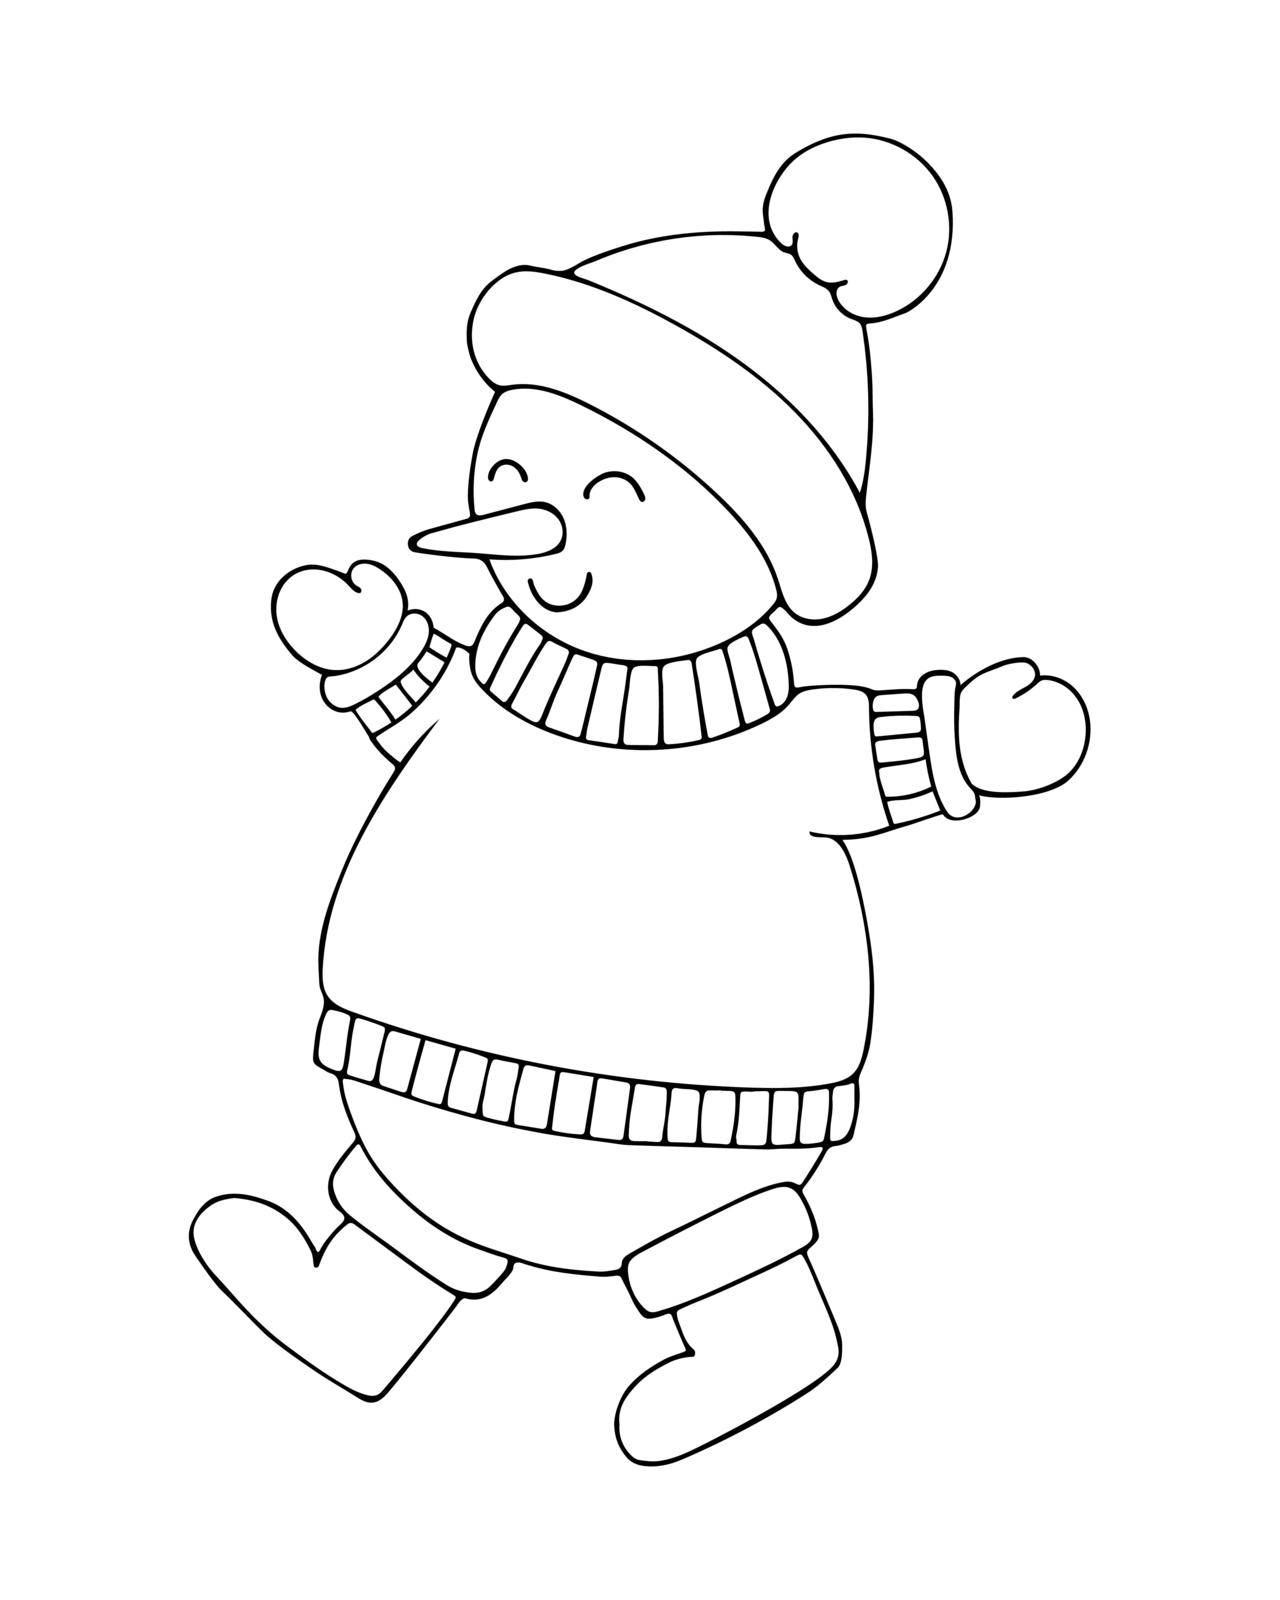 Coloring book snowman line art. Cute winter character in hat and sweater. Hand drawn vector black and white illustration.